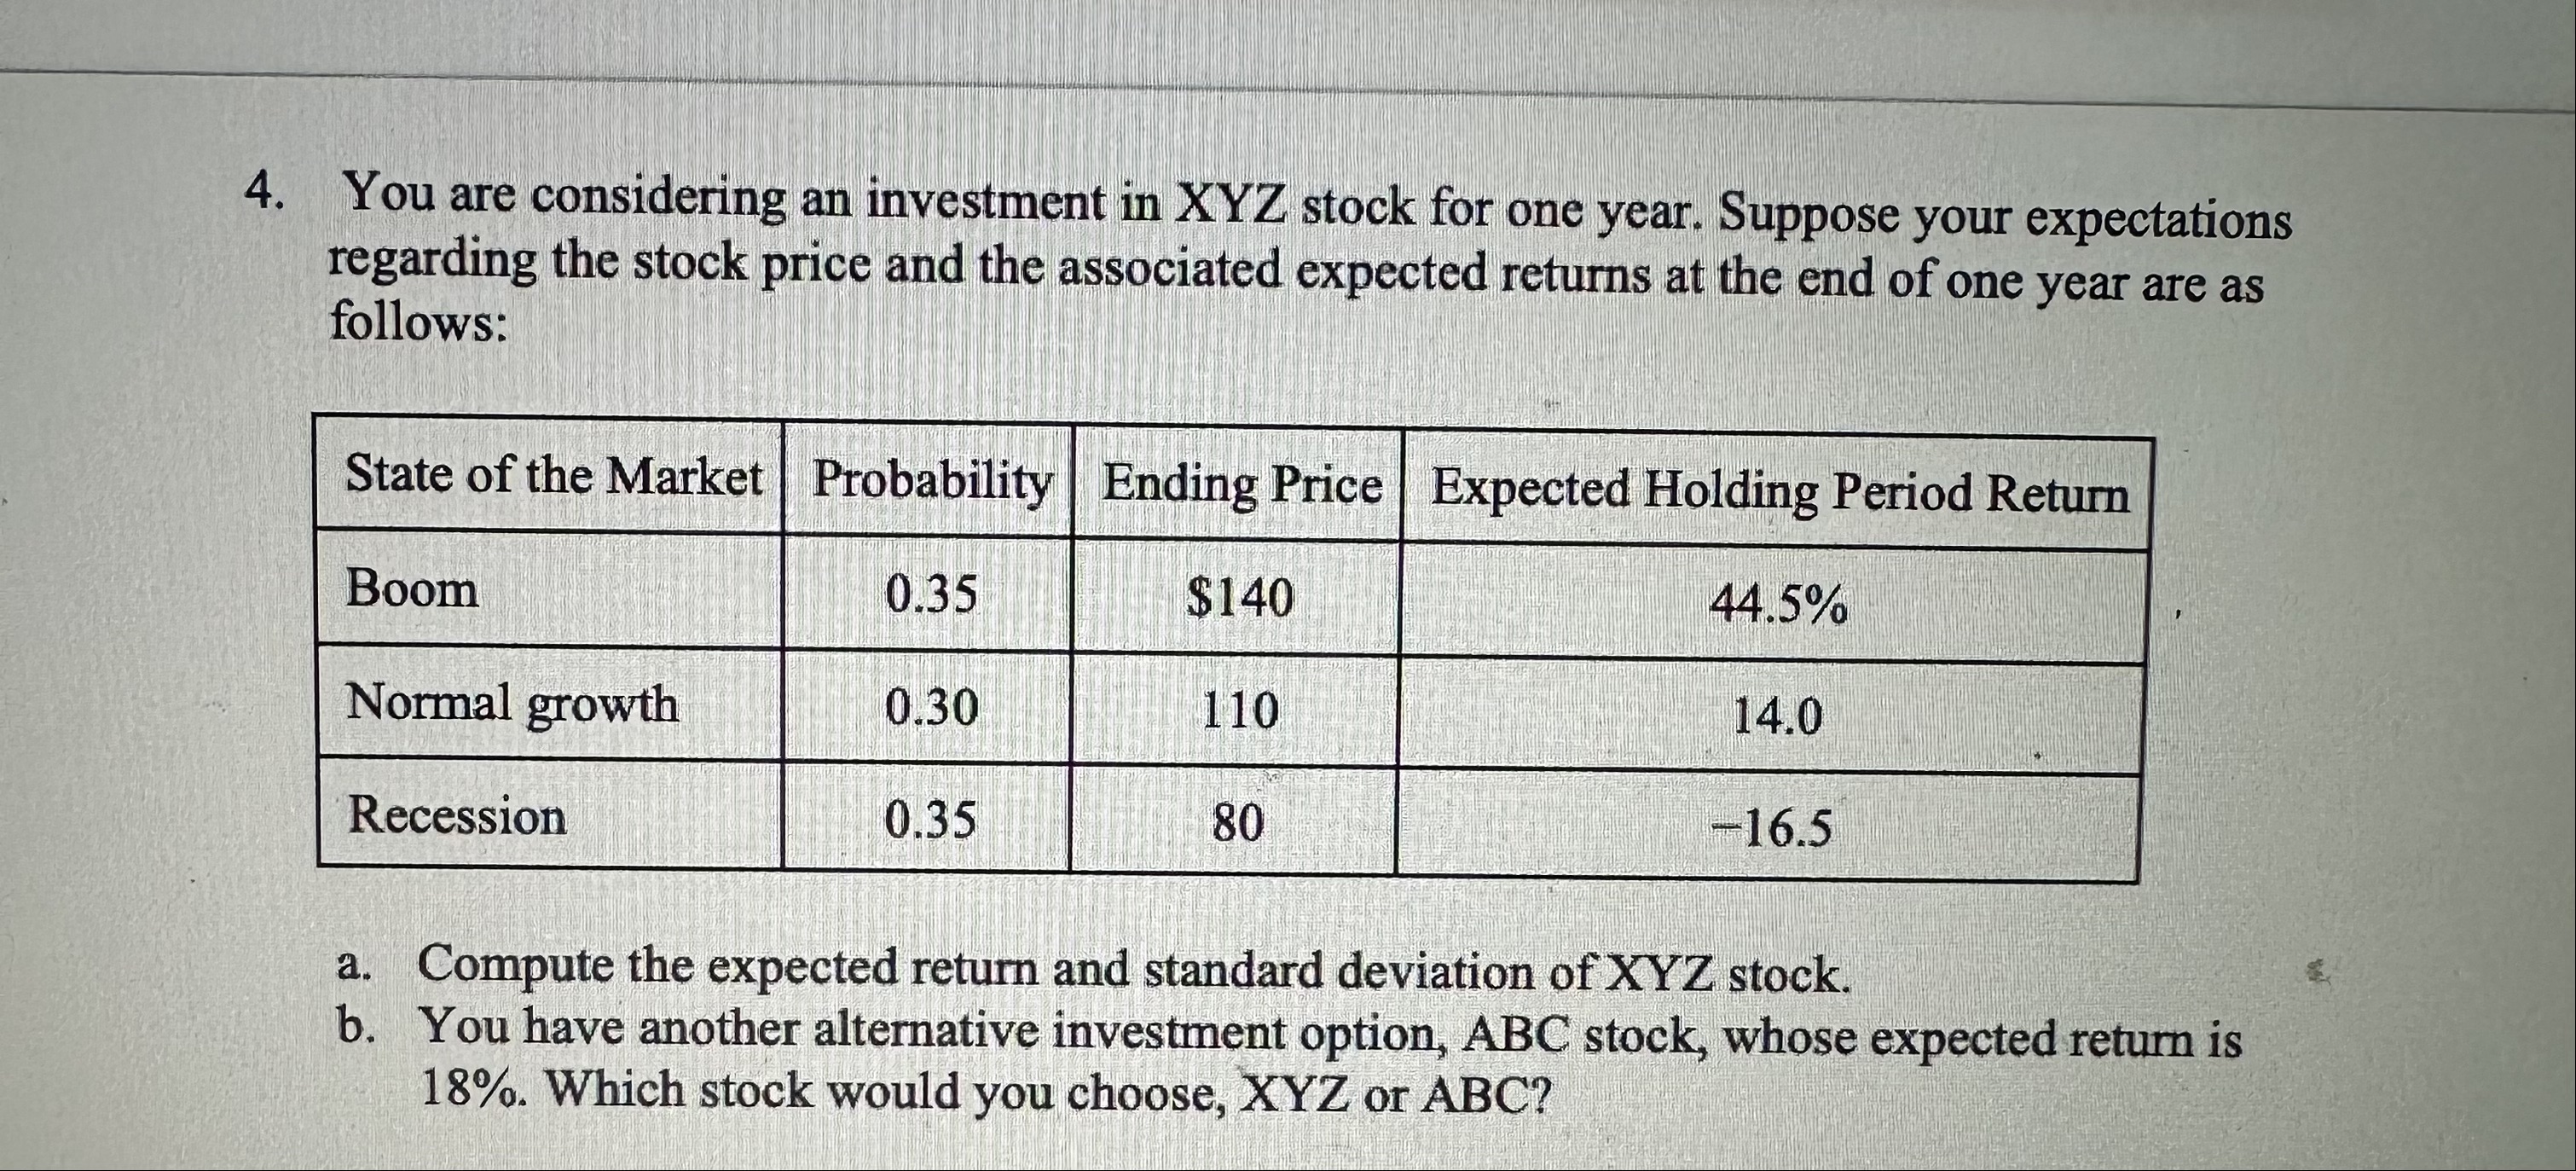 4. You are considering an investment in XYZ stock for one year. Suppose your expectations regarding the stock